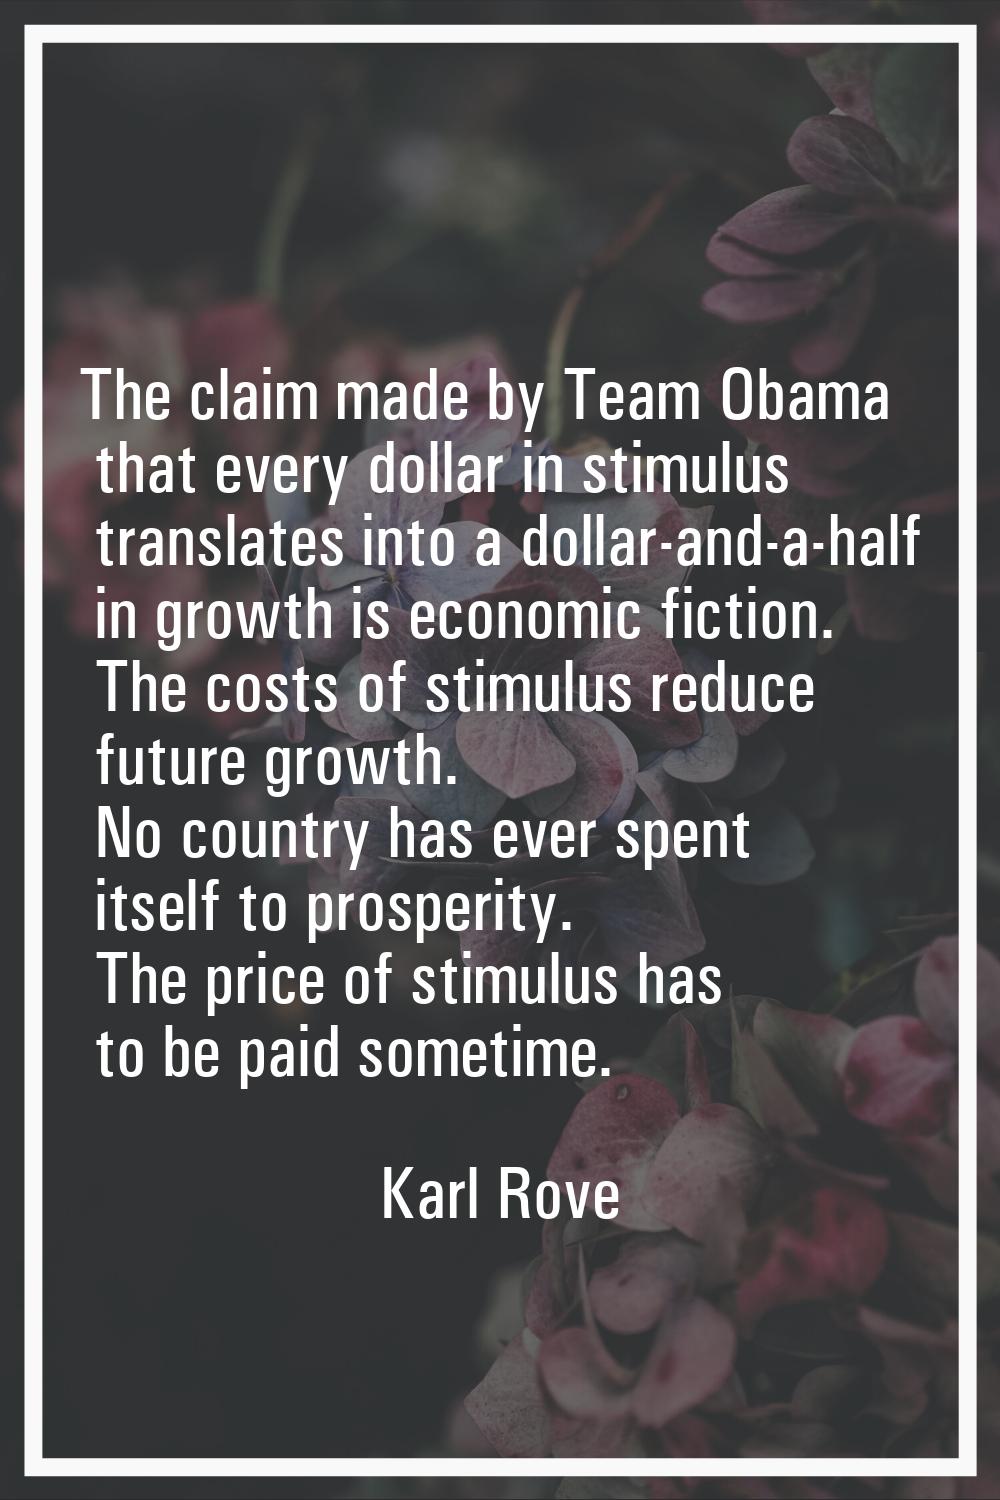 The claim made by Team Obama that every dollar in stimulus translates into a dollar-and-a-half in g